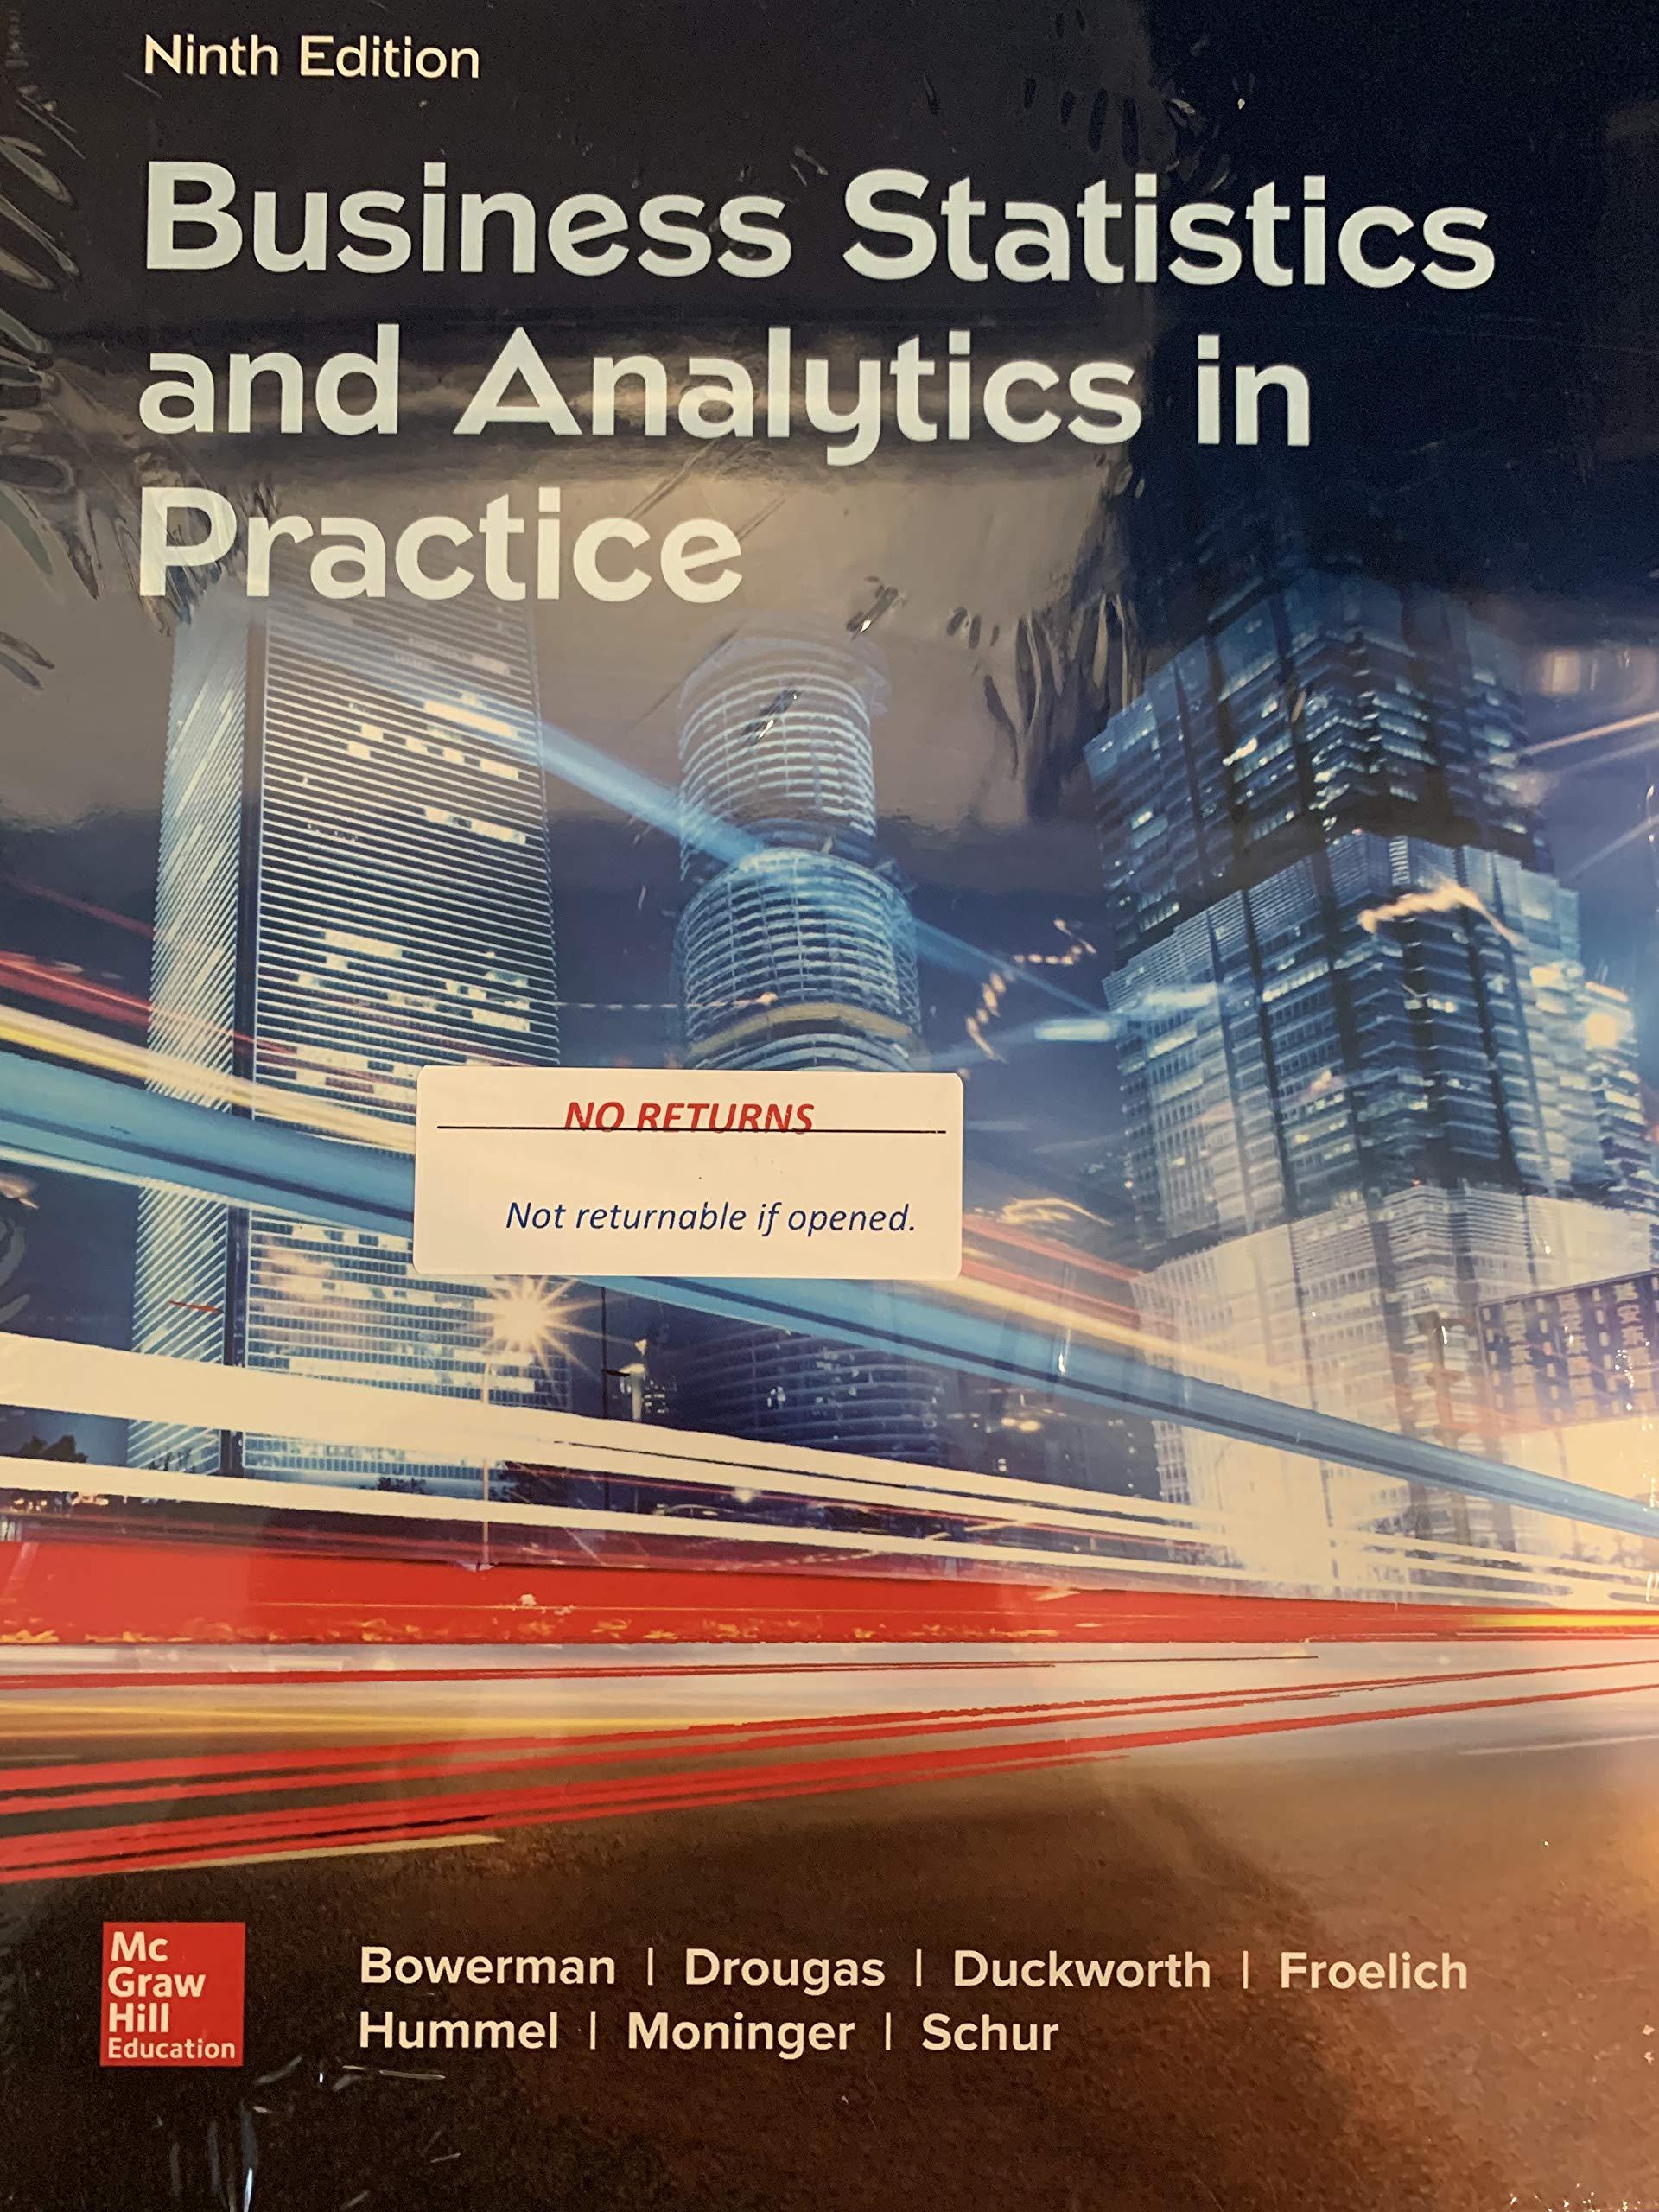 business statistics and analytics in practice 9th edition bruce bowerman, anne m. drougas, william m.